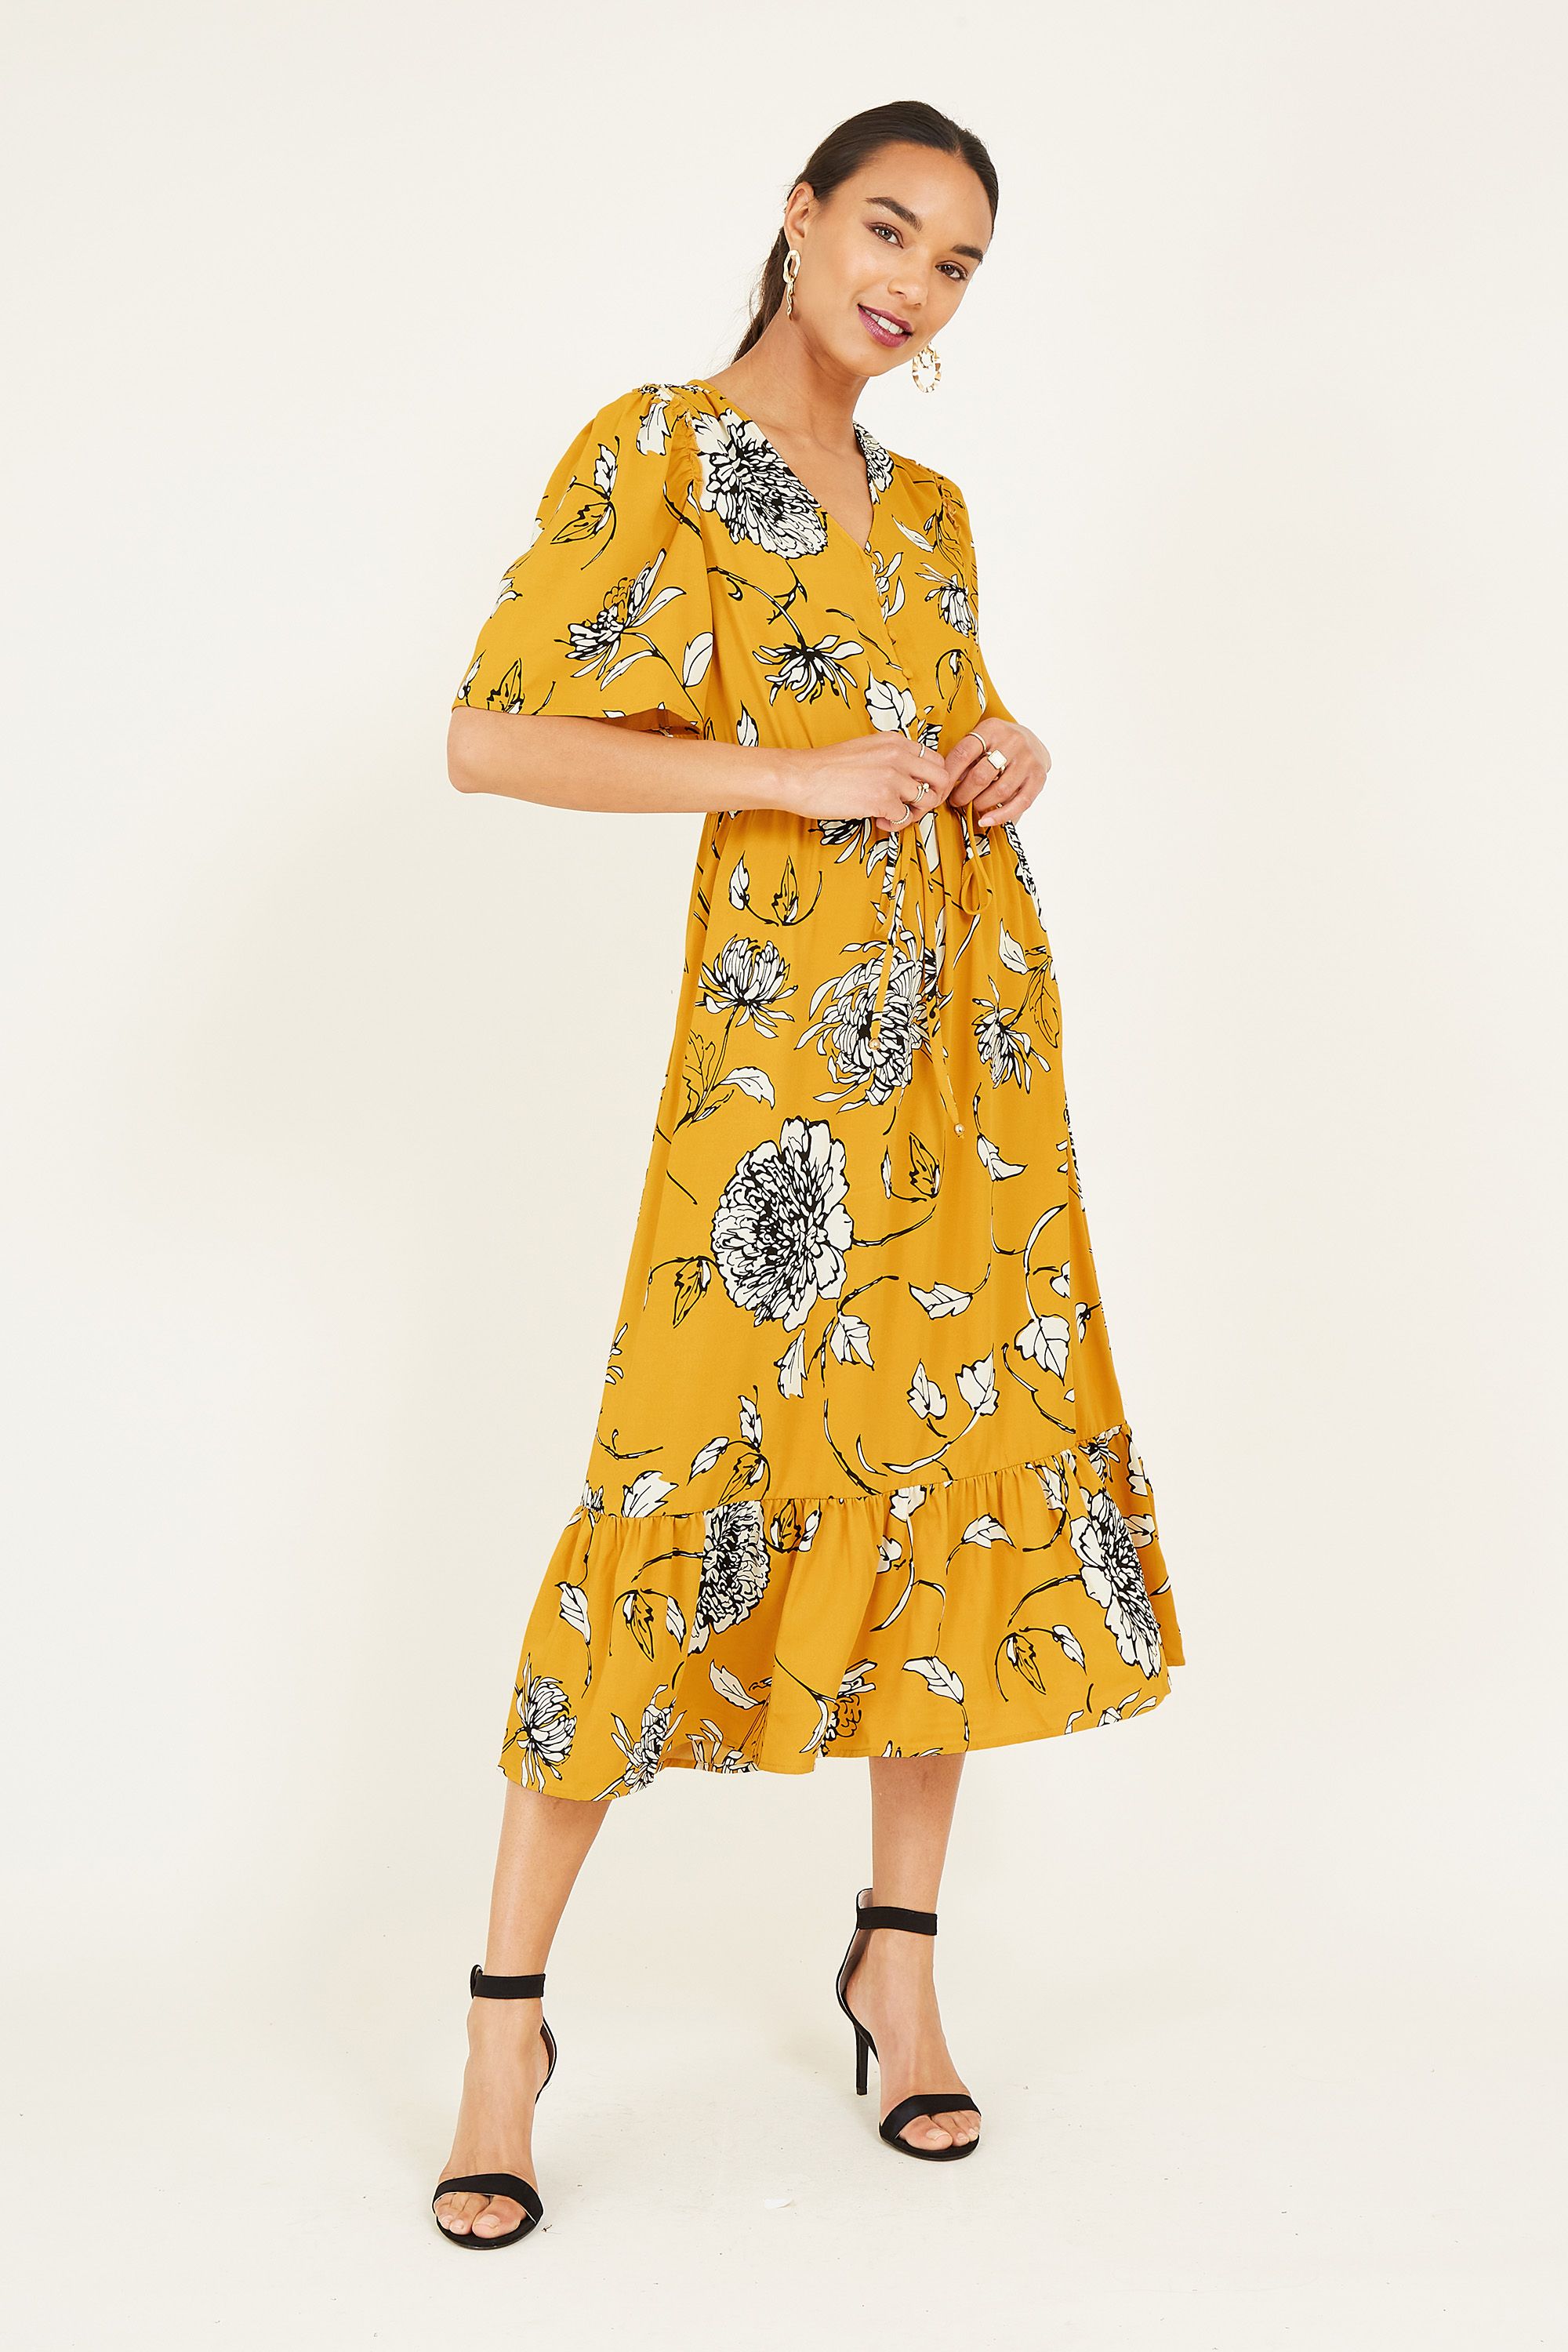 For a sought-after blend of minimum effort and maximum style. opt for this Sketchy Rose Midi Dress. It comes with a mid-length hemline detailed with a peplum feature and a complementary drawstring waist to enhance your curves. Complete with a retro floral print, buttons run down the front for a feel-good finish.